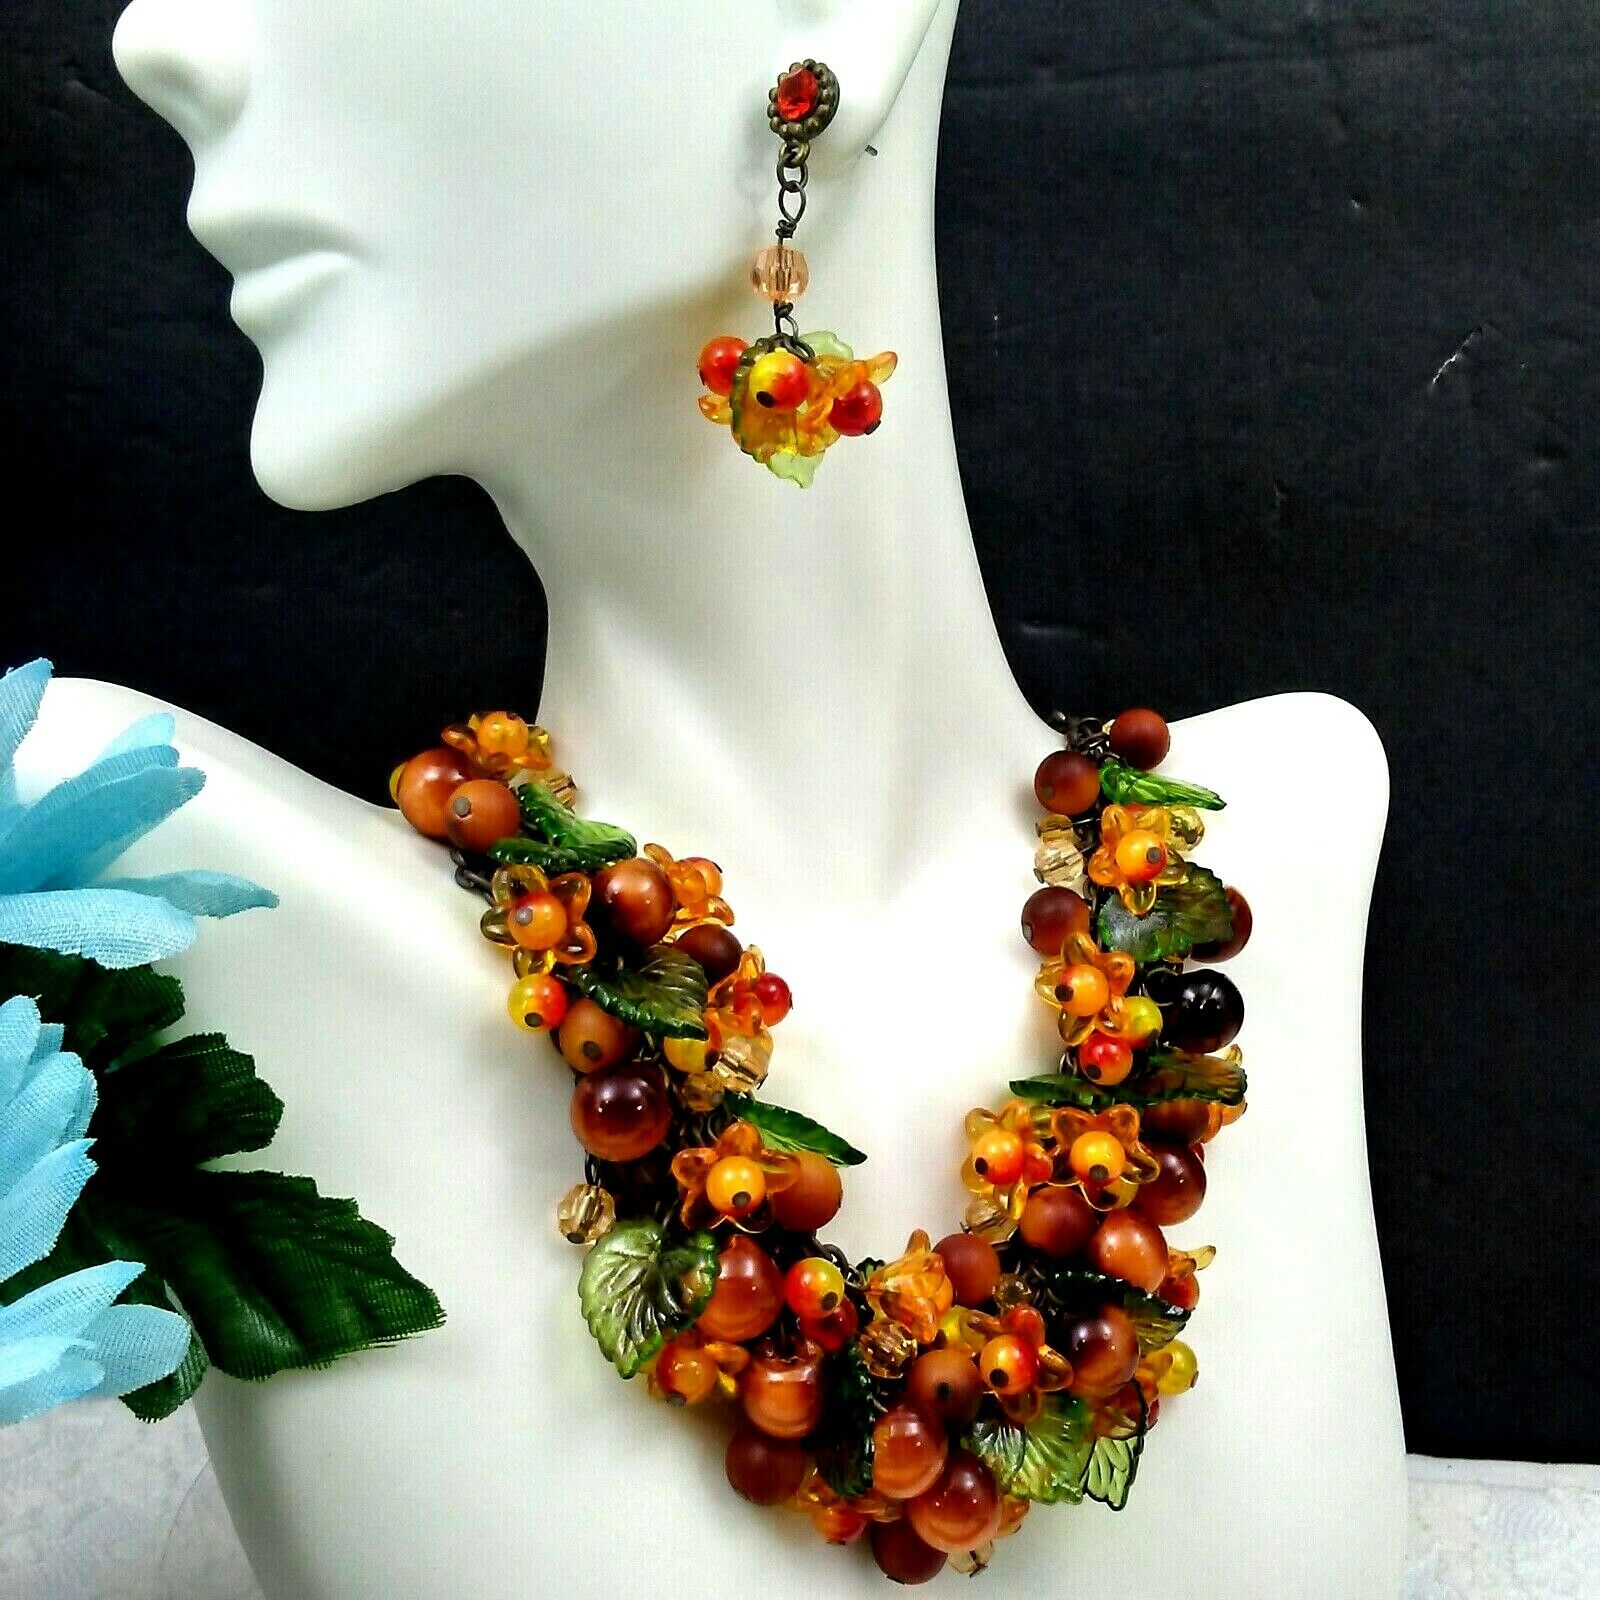 Estate Sale: Floral Lucite Cluster Beaded Necklace 16"+ Matching Earrings #18-11